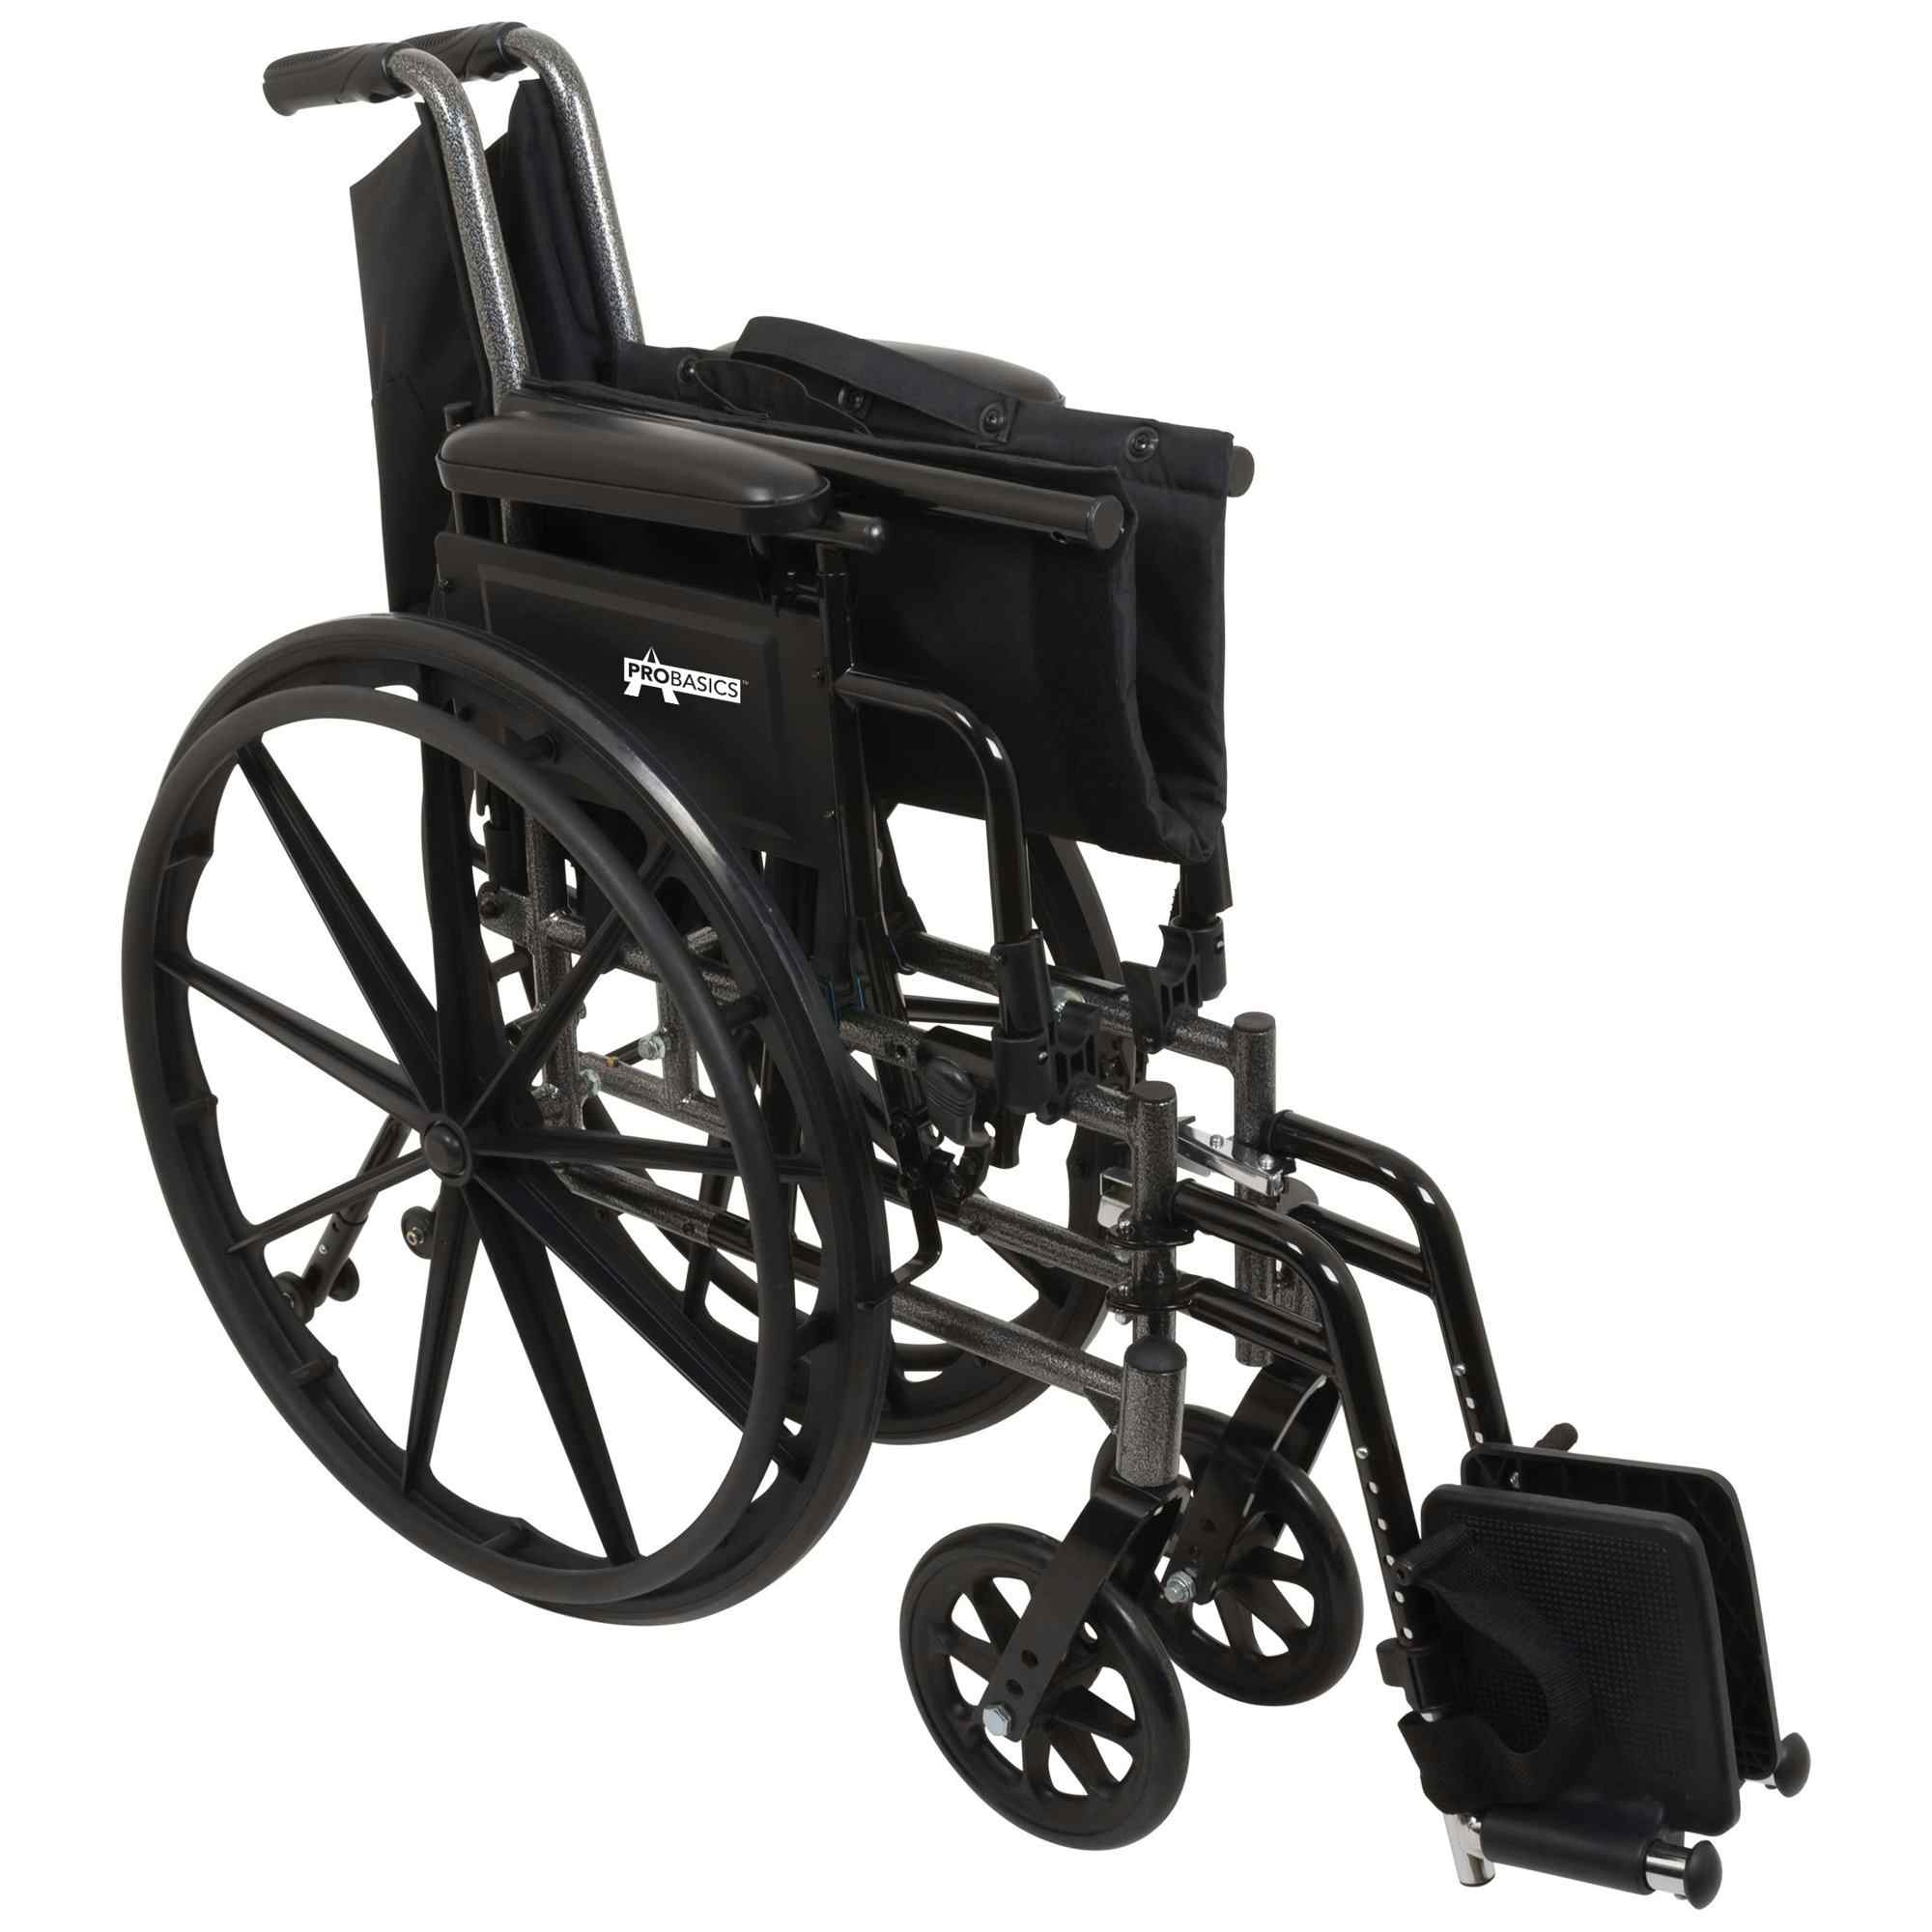 PMI ProBasics K3-Lite Wheelchair, Flip-Up Height Adjustable Desk Arms, Swing-Away Footrests, WC31616DS, 16" - 1 Each